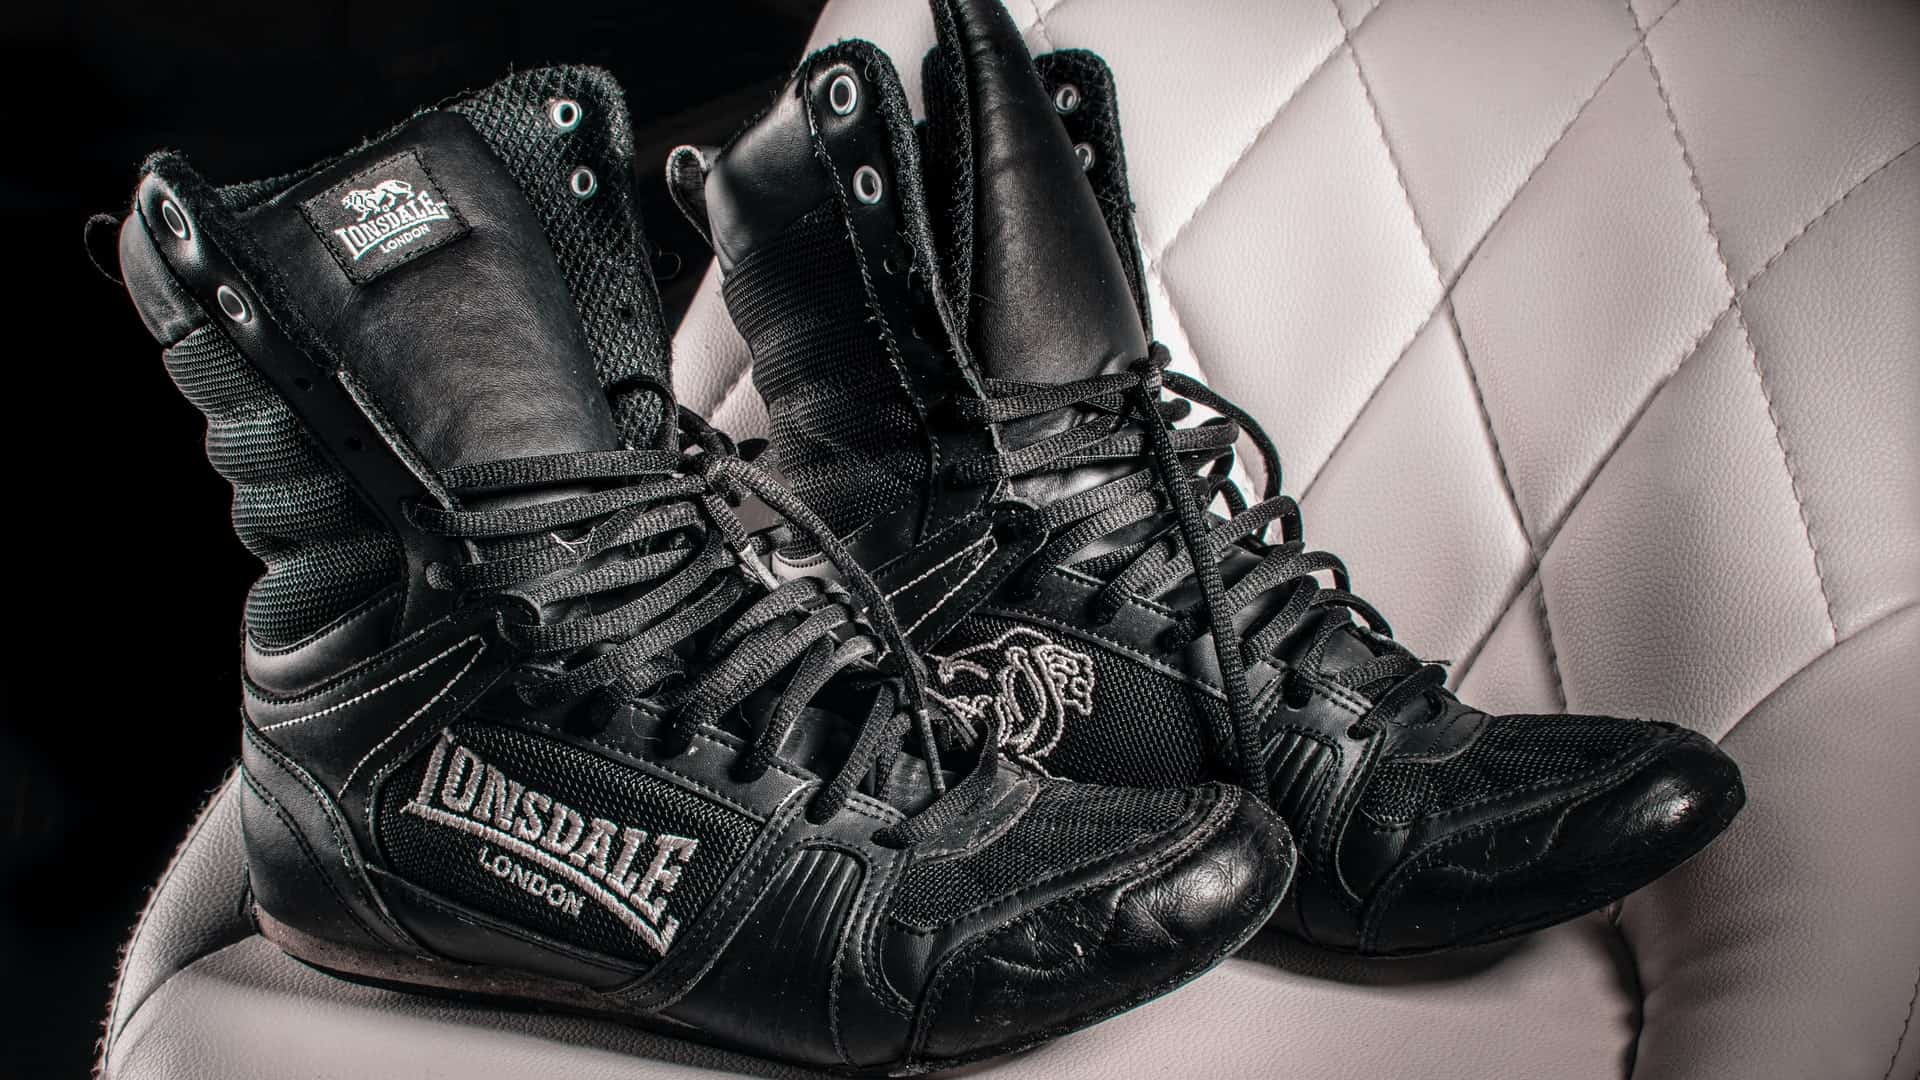 A pair of black boxing shoes